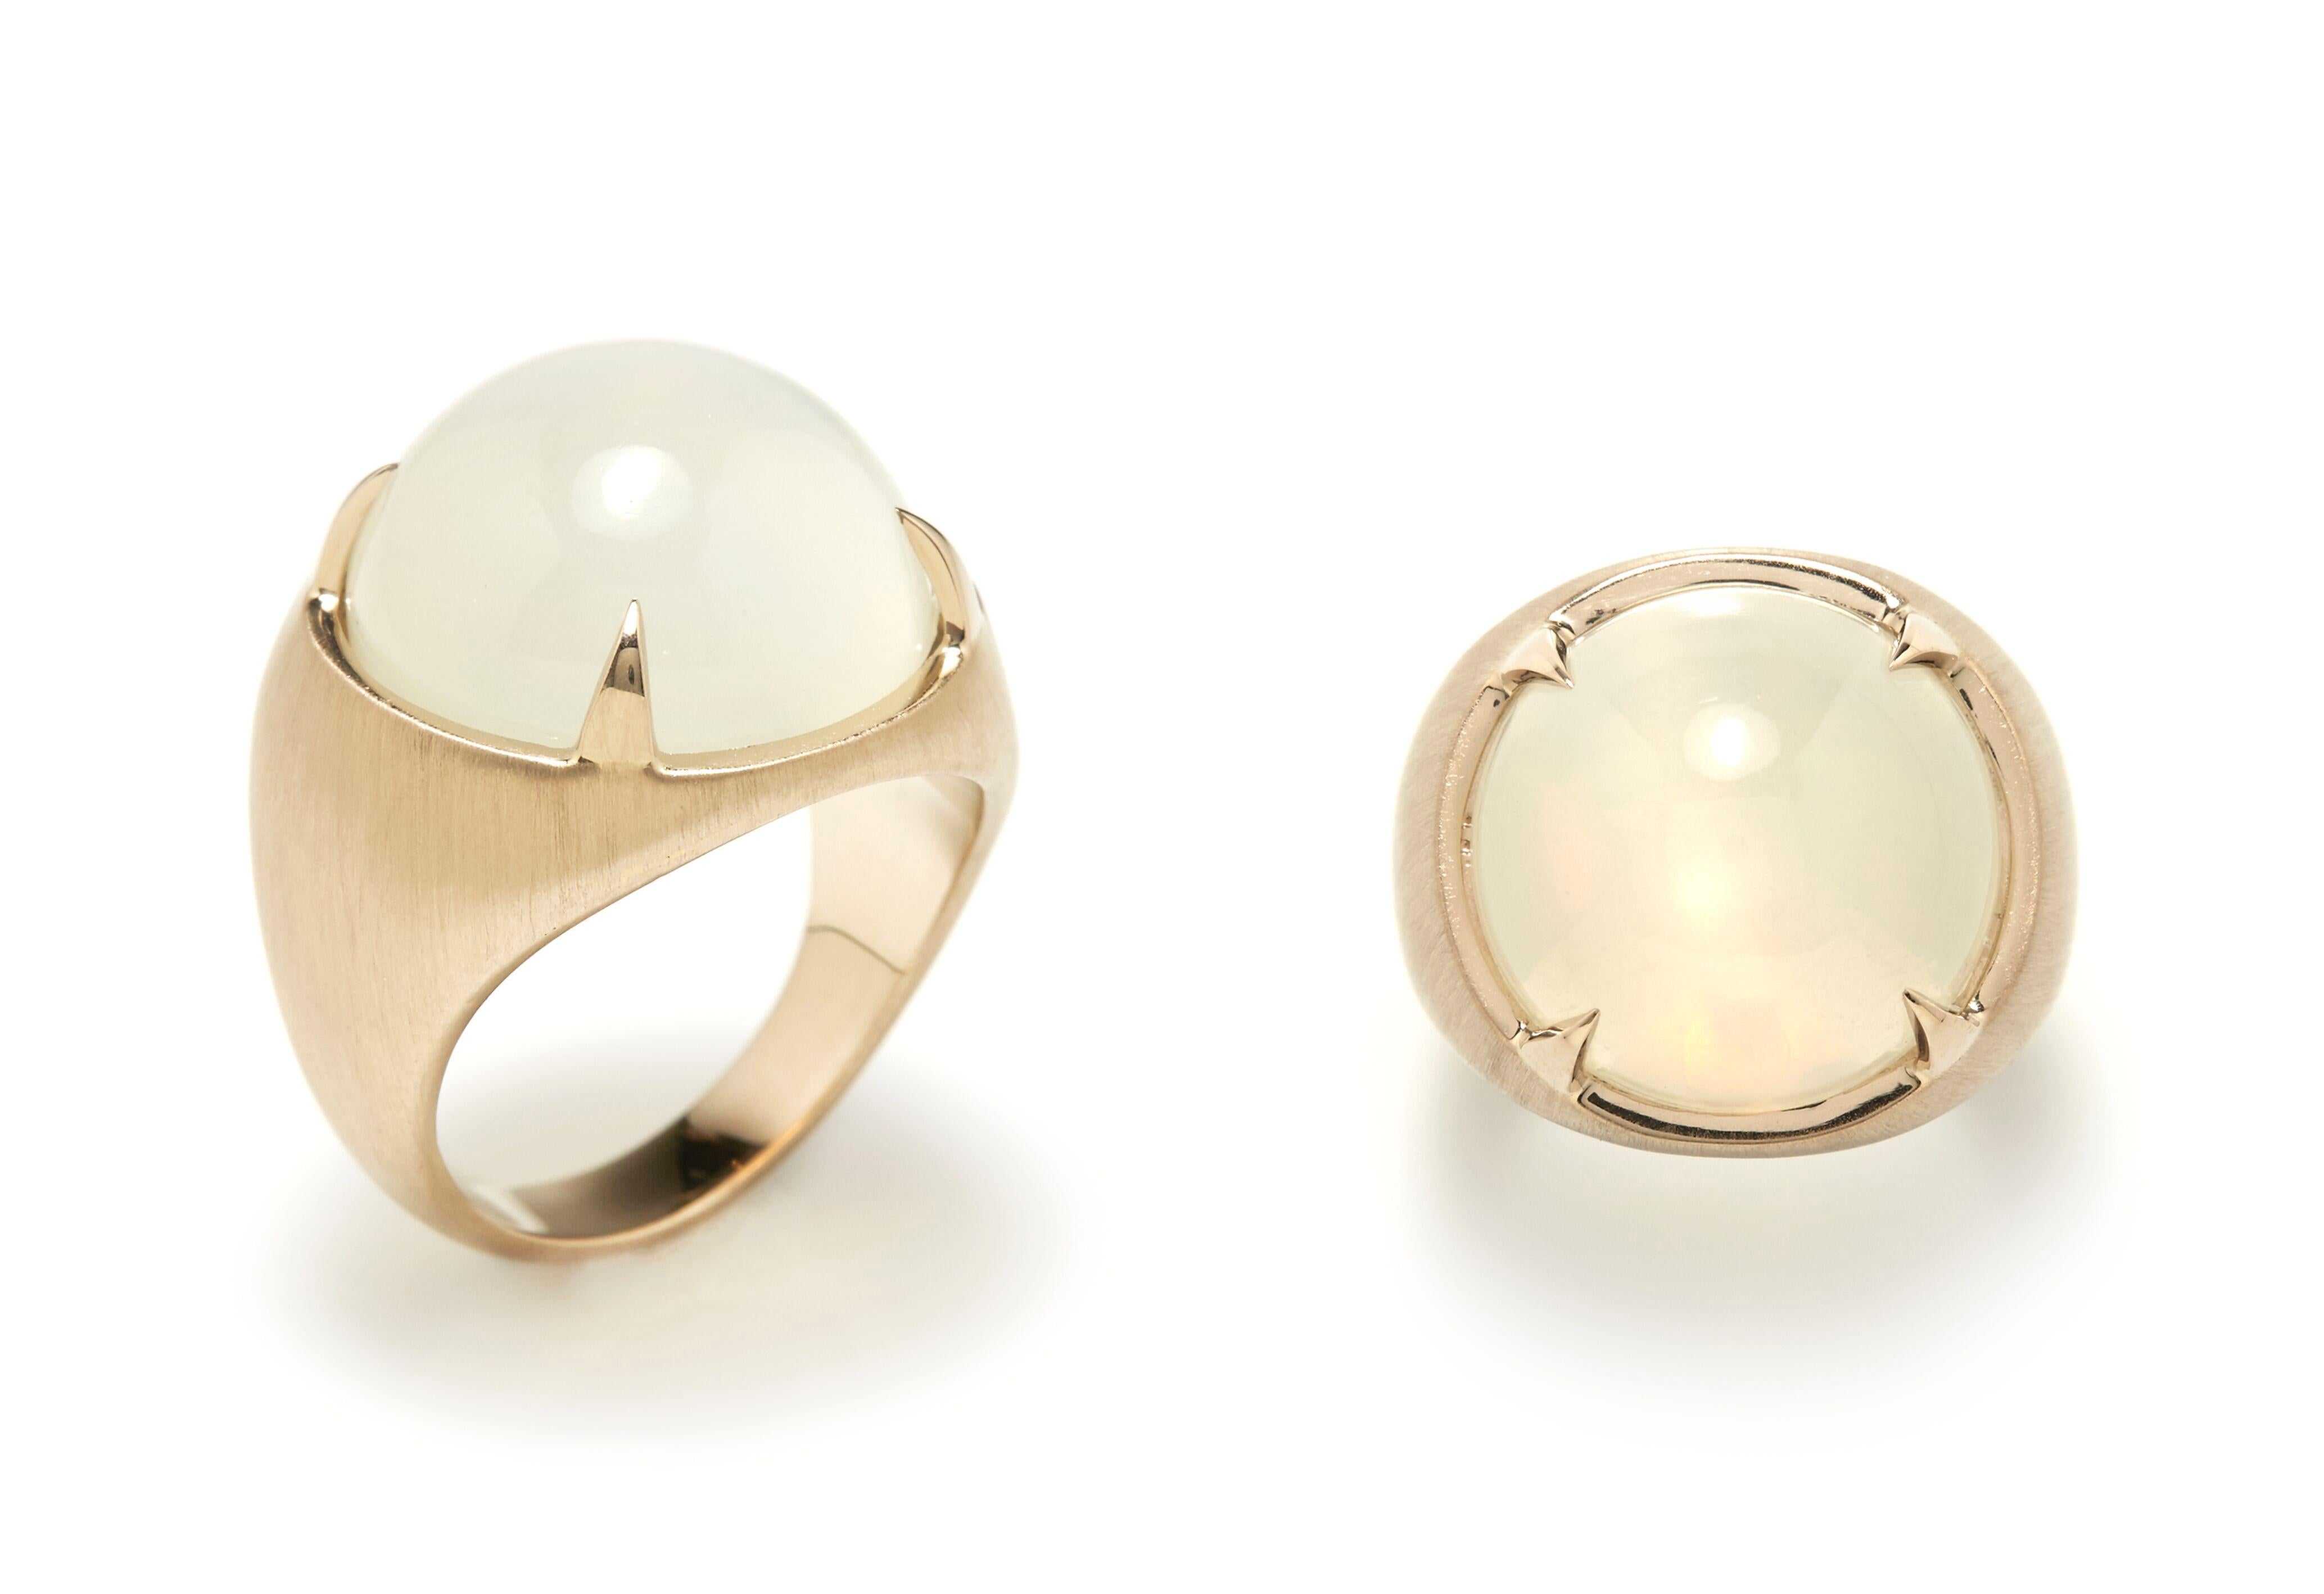 Designed exclusively by Ara Vartanian, this 18k Yellow Gold Ring features one Moonstone, in a round cabochon cut, weighing 9,8ct (nine carats and eight points) held in place by four gold claws.

For this ring has been made exclusively by Ara